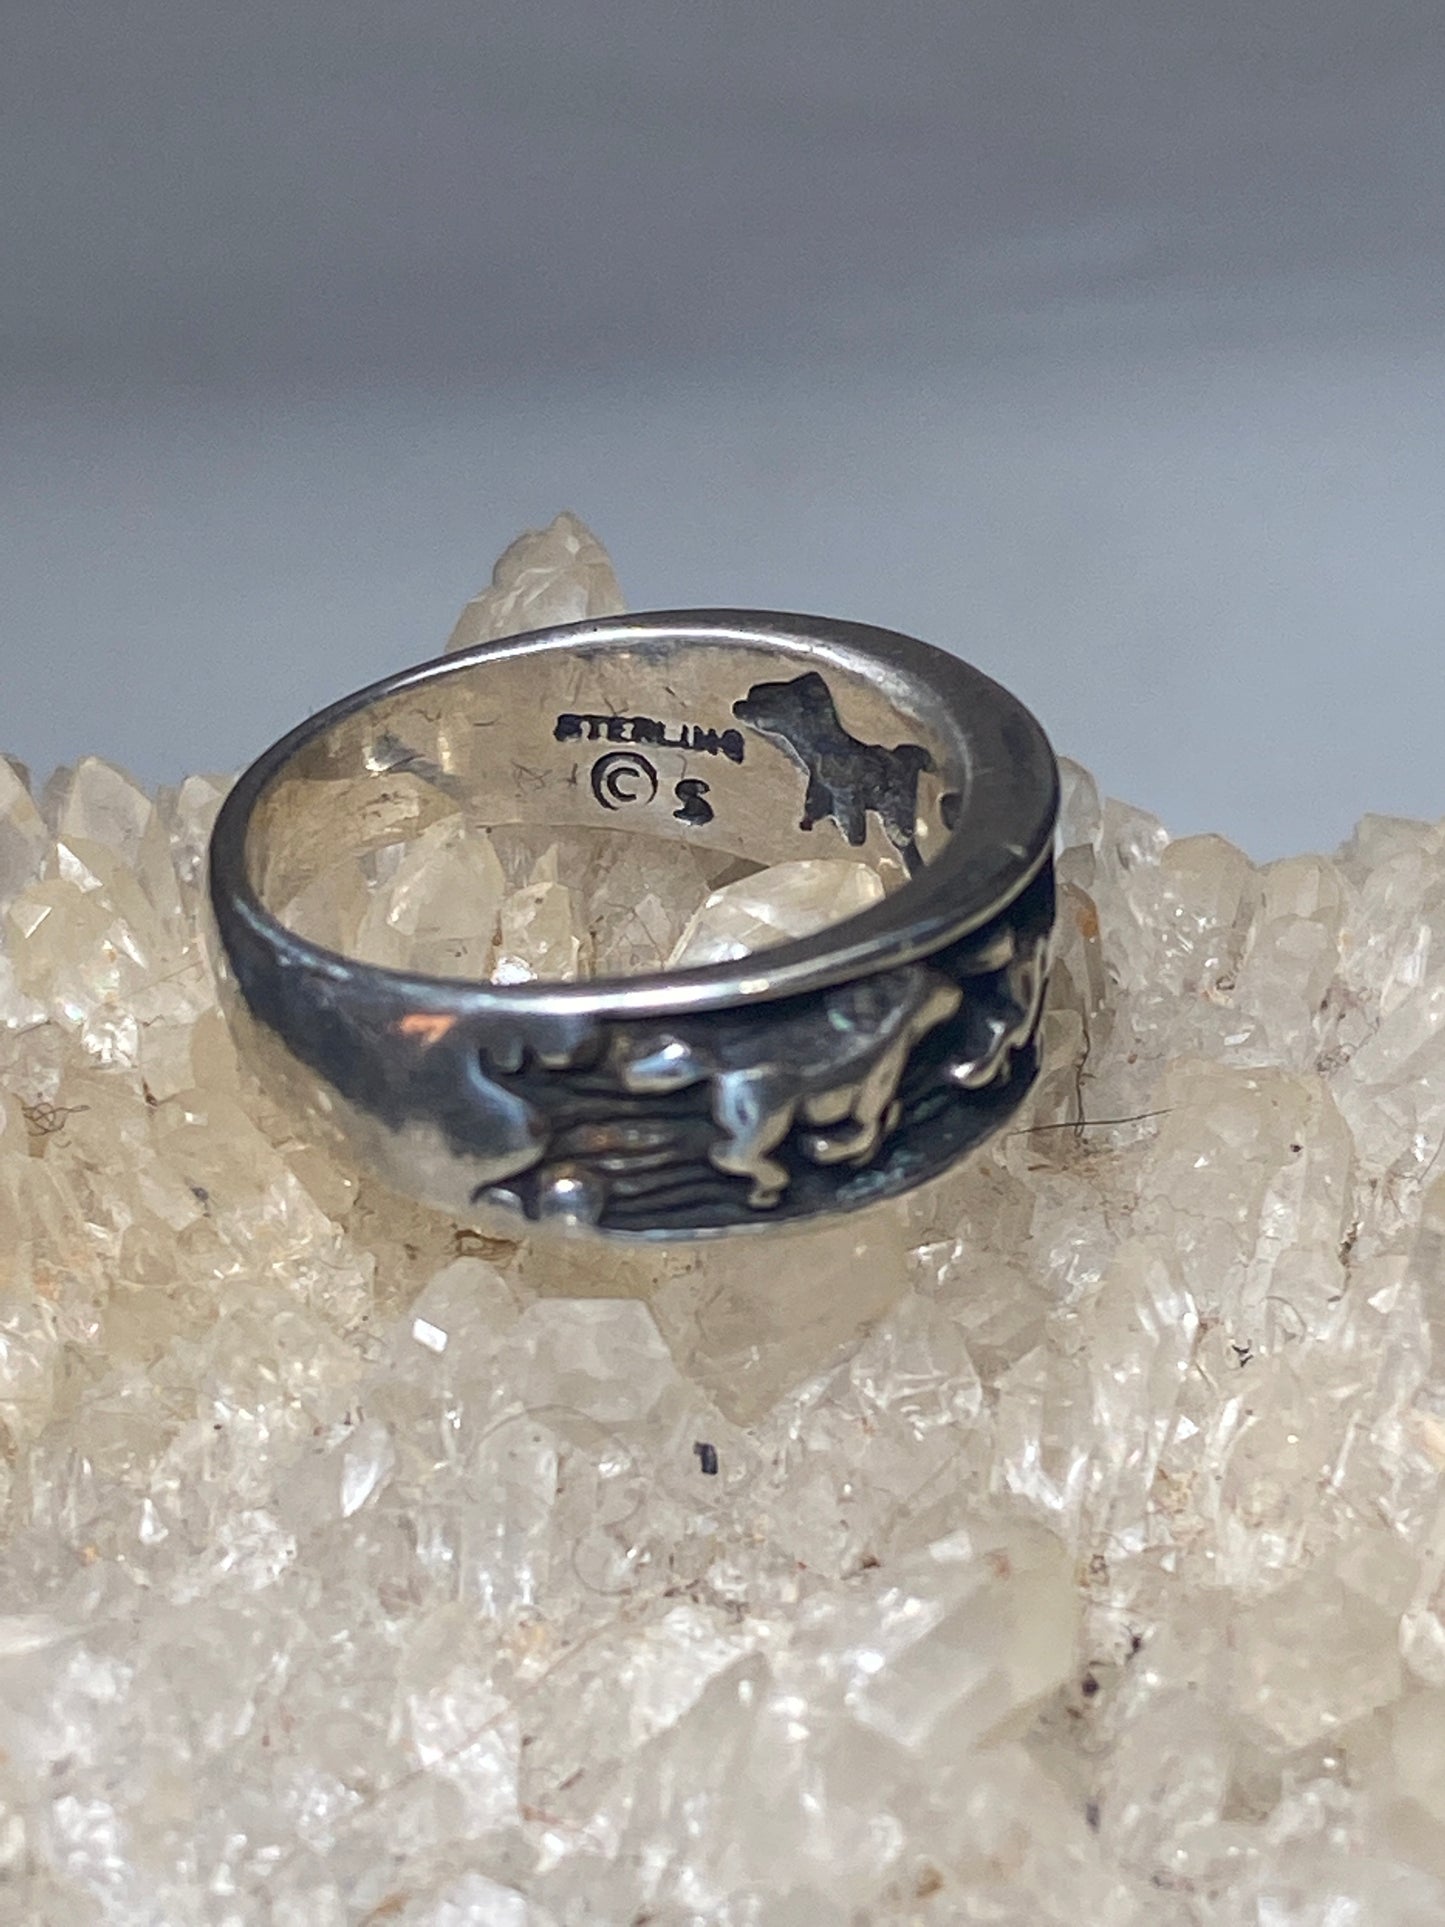 Horse ring horses cowgirl band pinky sterling silver southwest women girls b